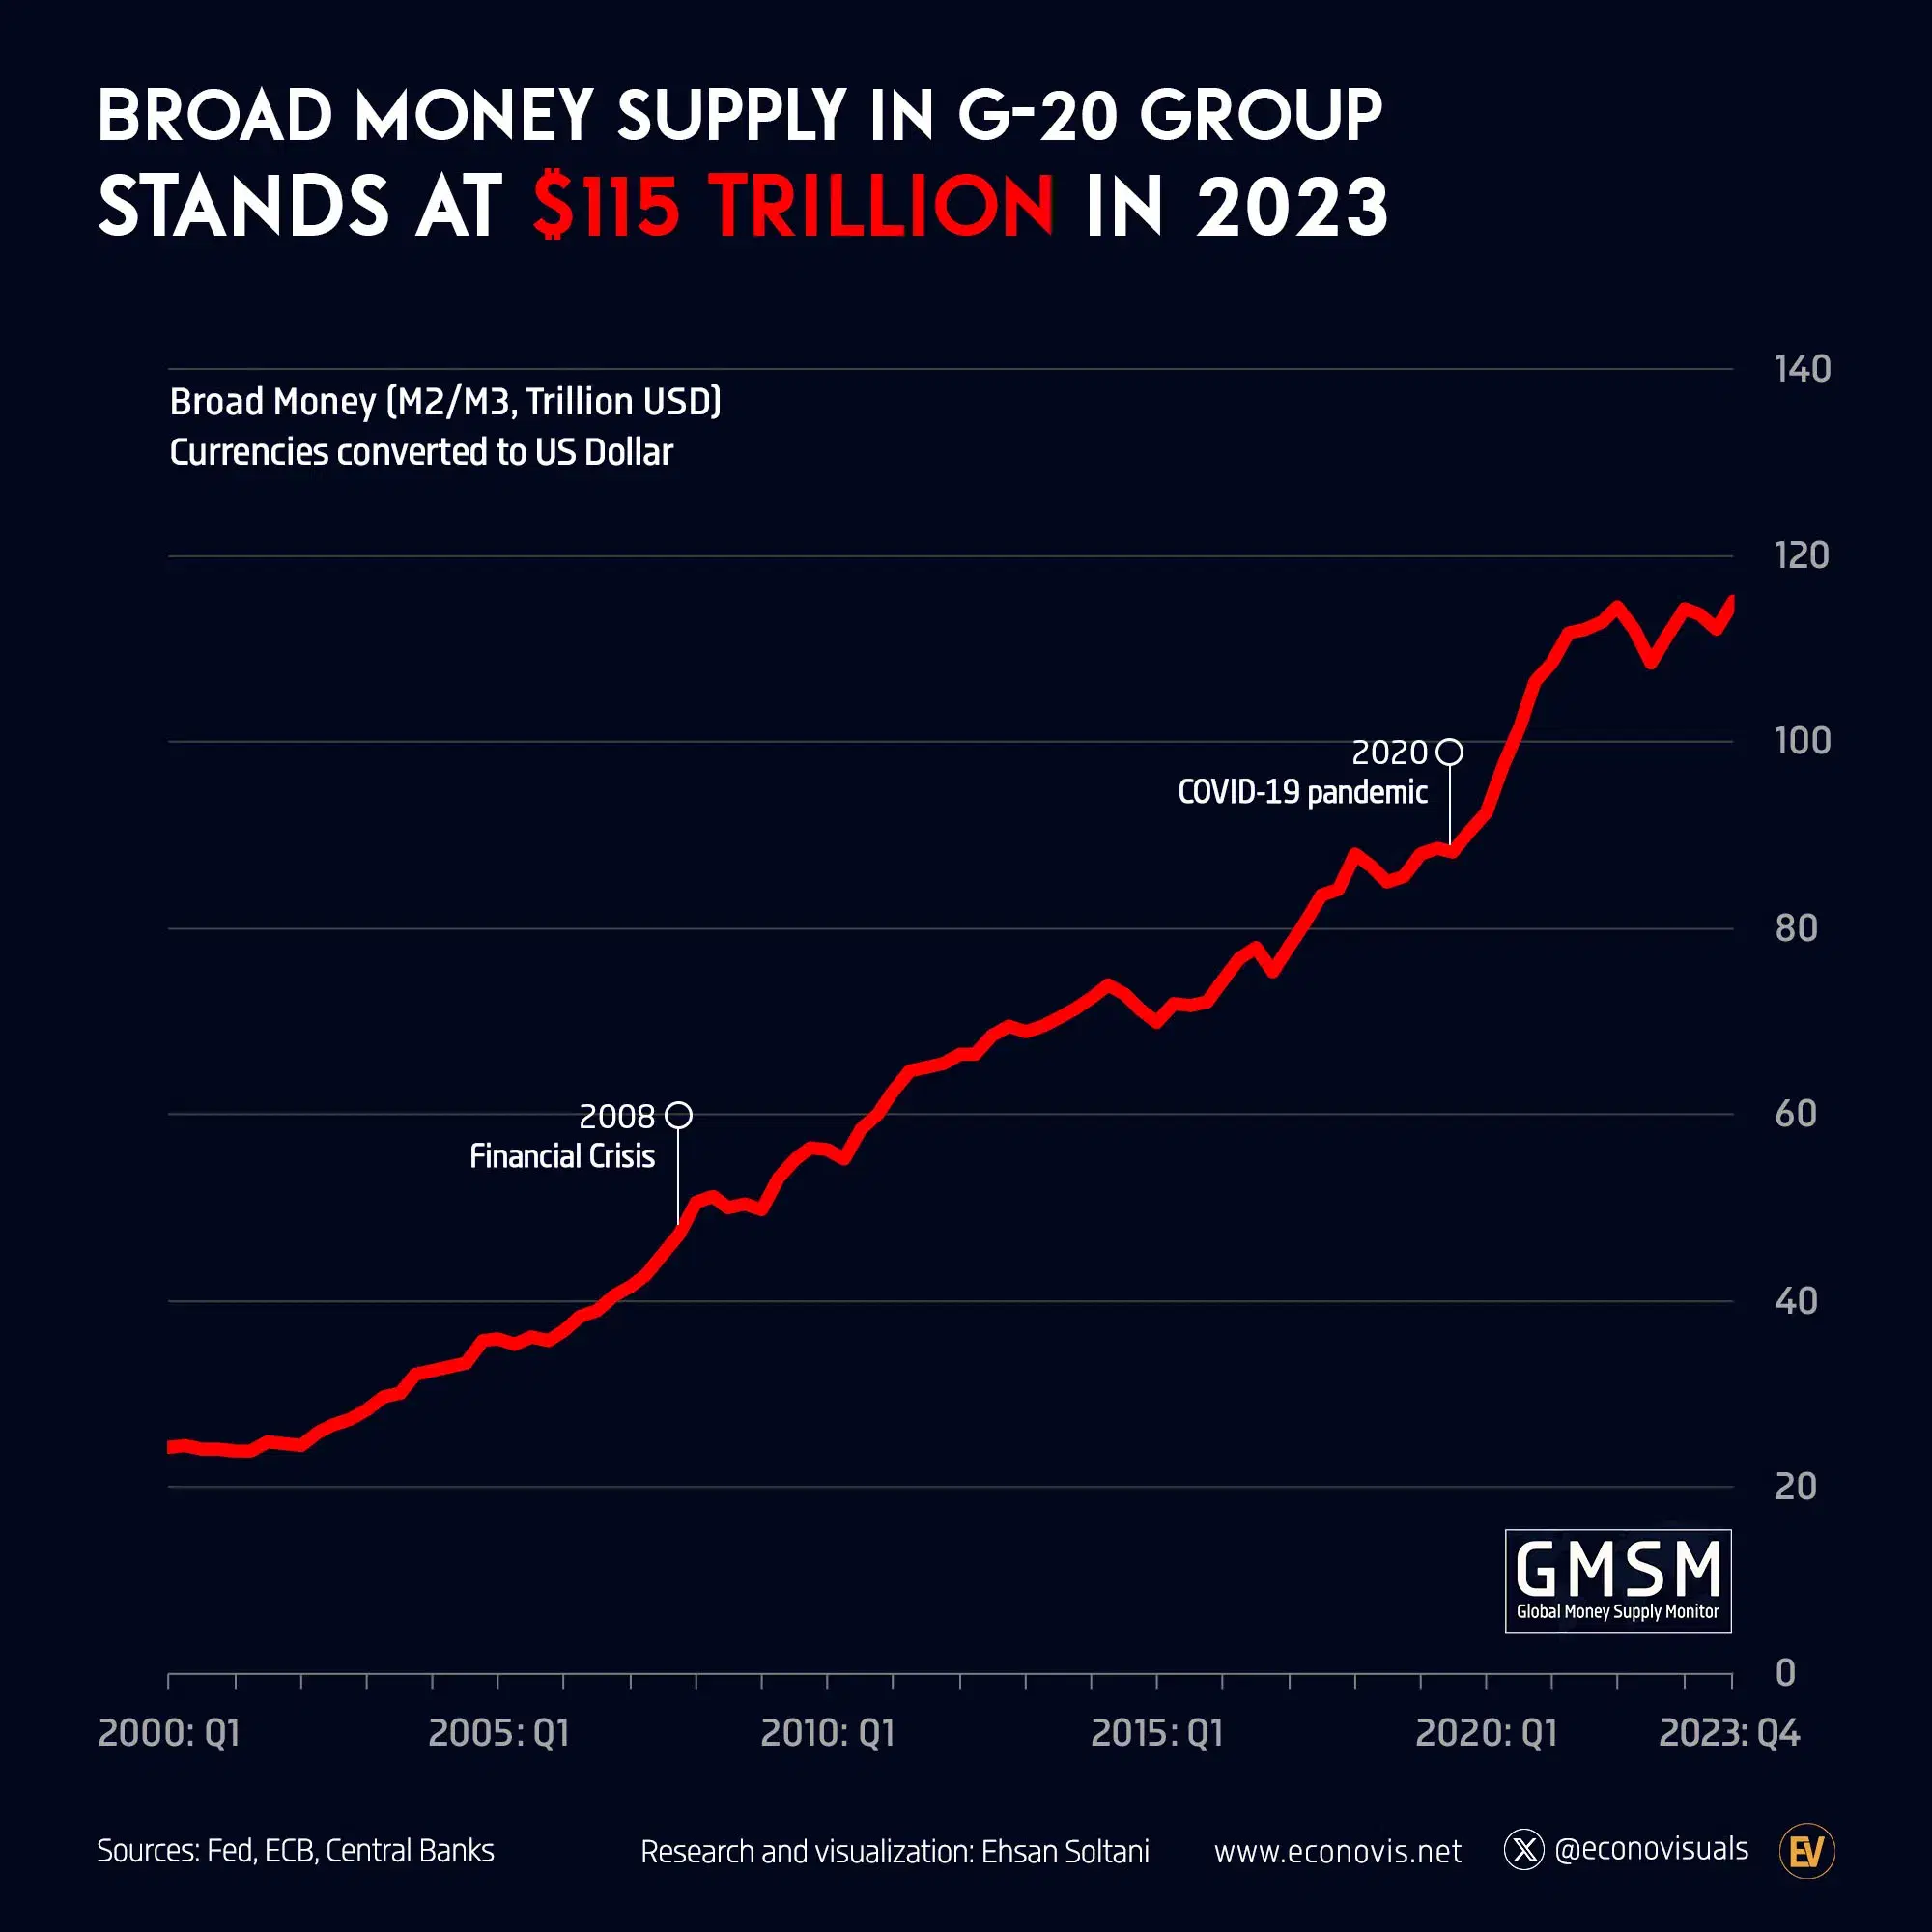 Money Supply in G-20 Group Stands at $115 Trillion in 2023